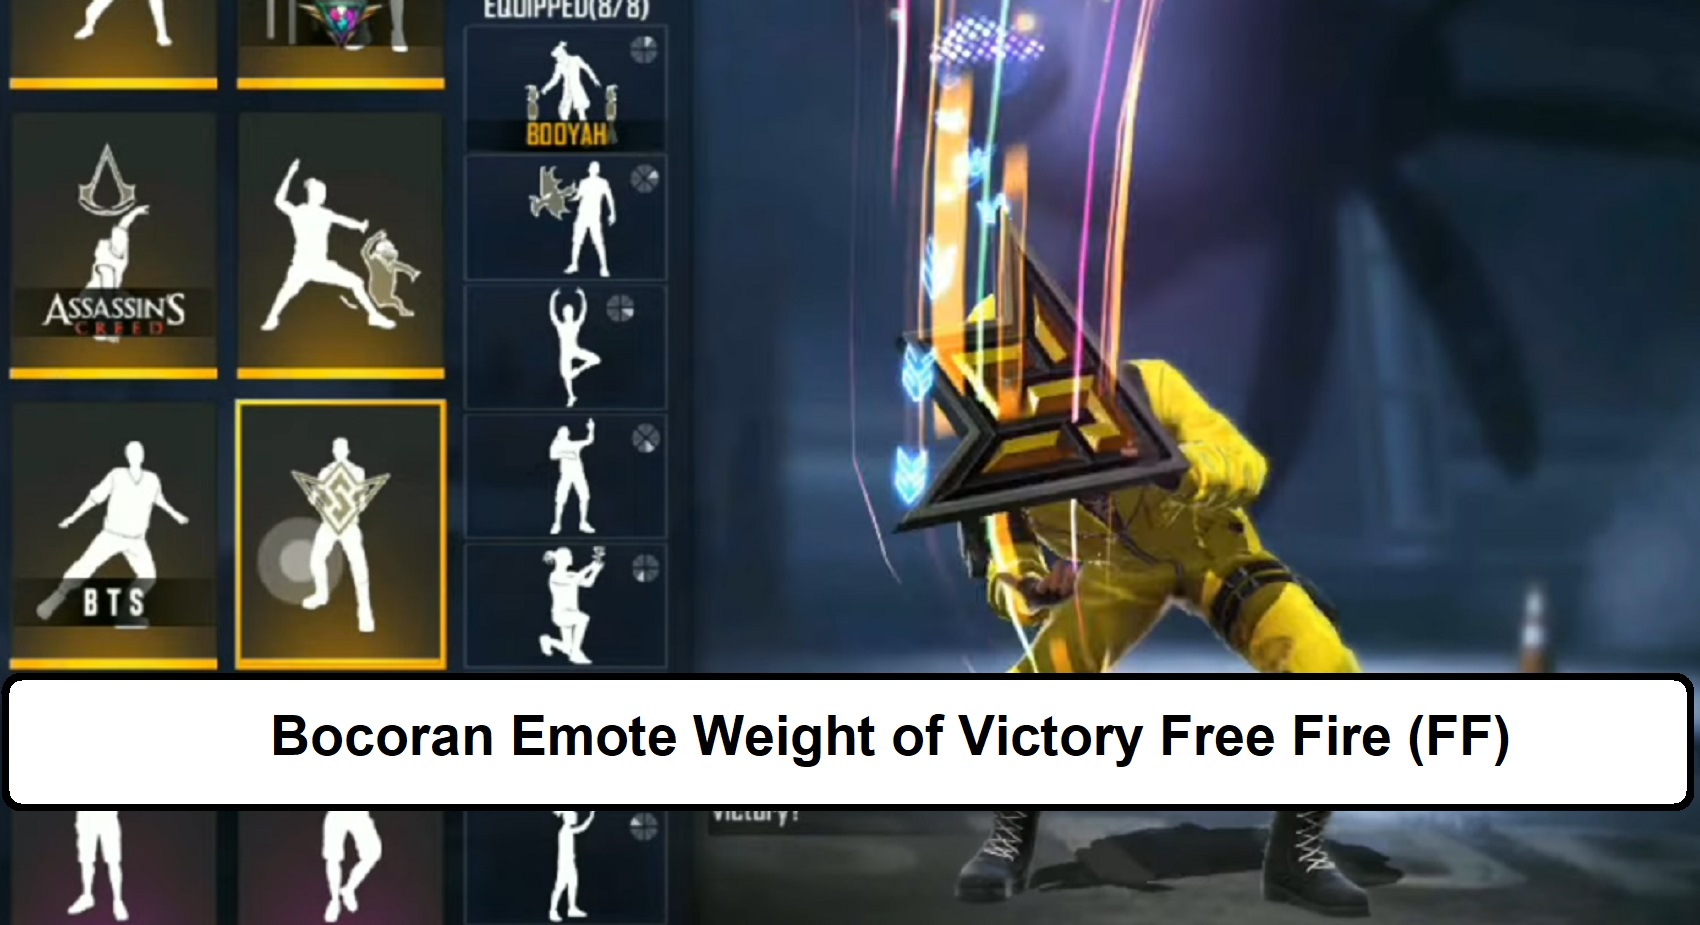 Bocoran Emote Weight of Victory Free Fire (FF)